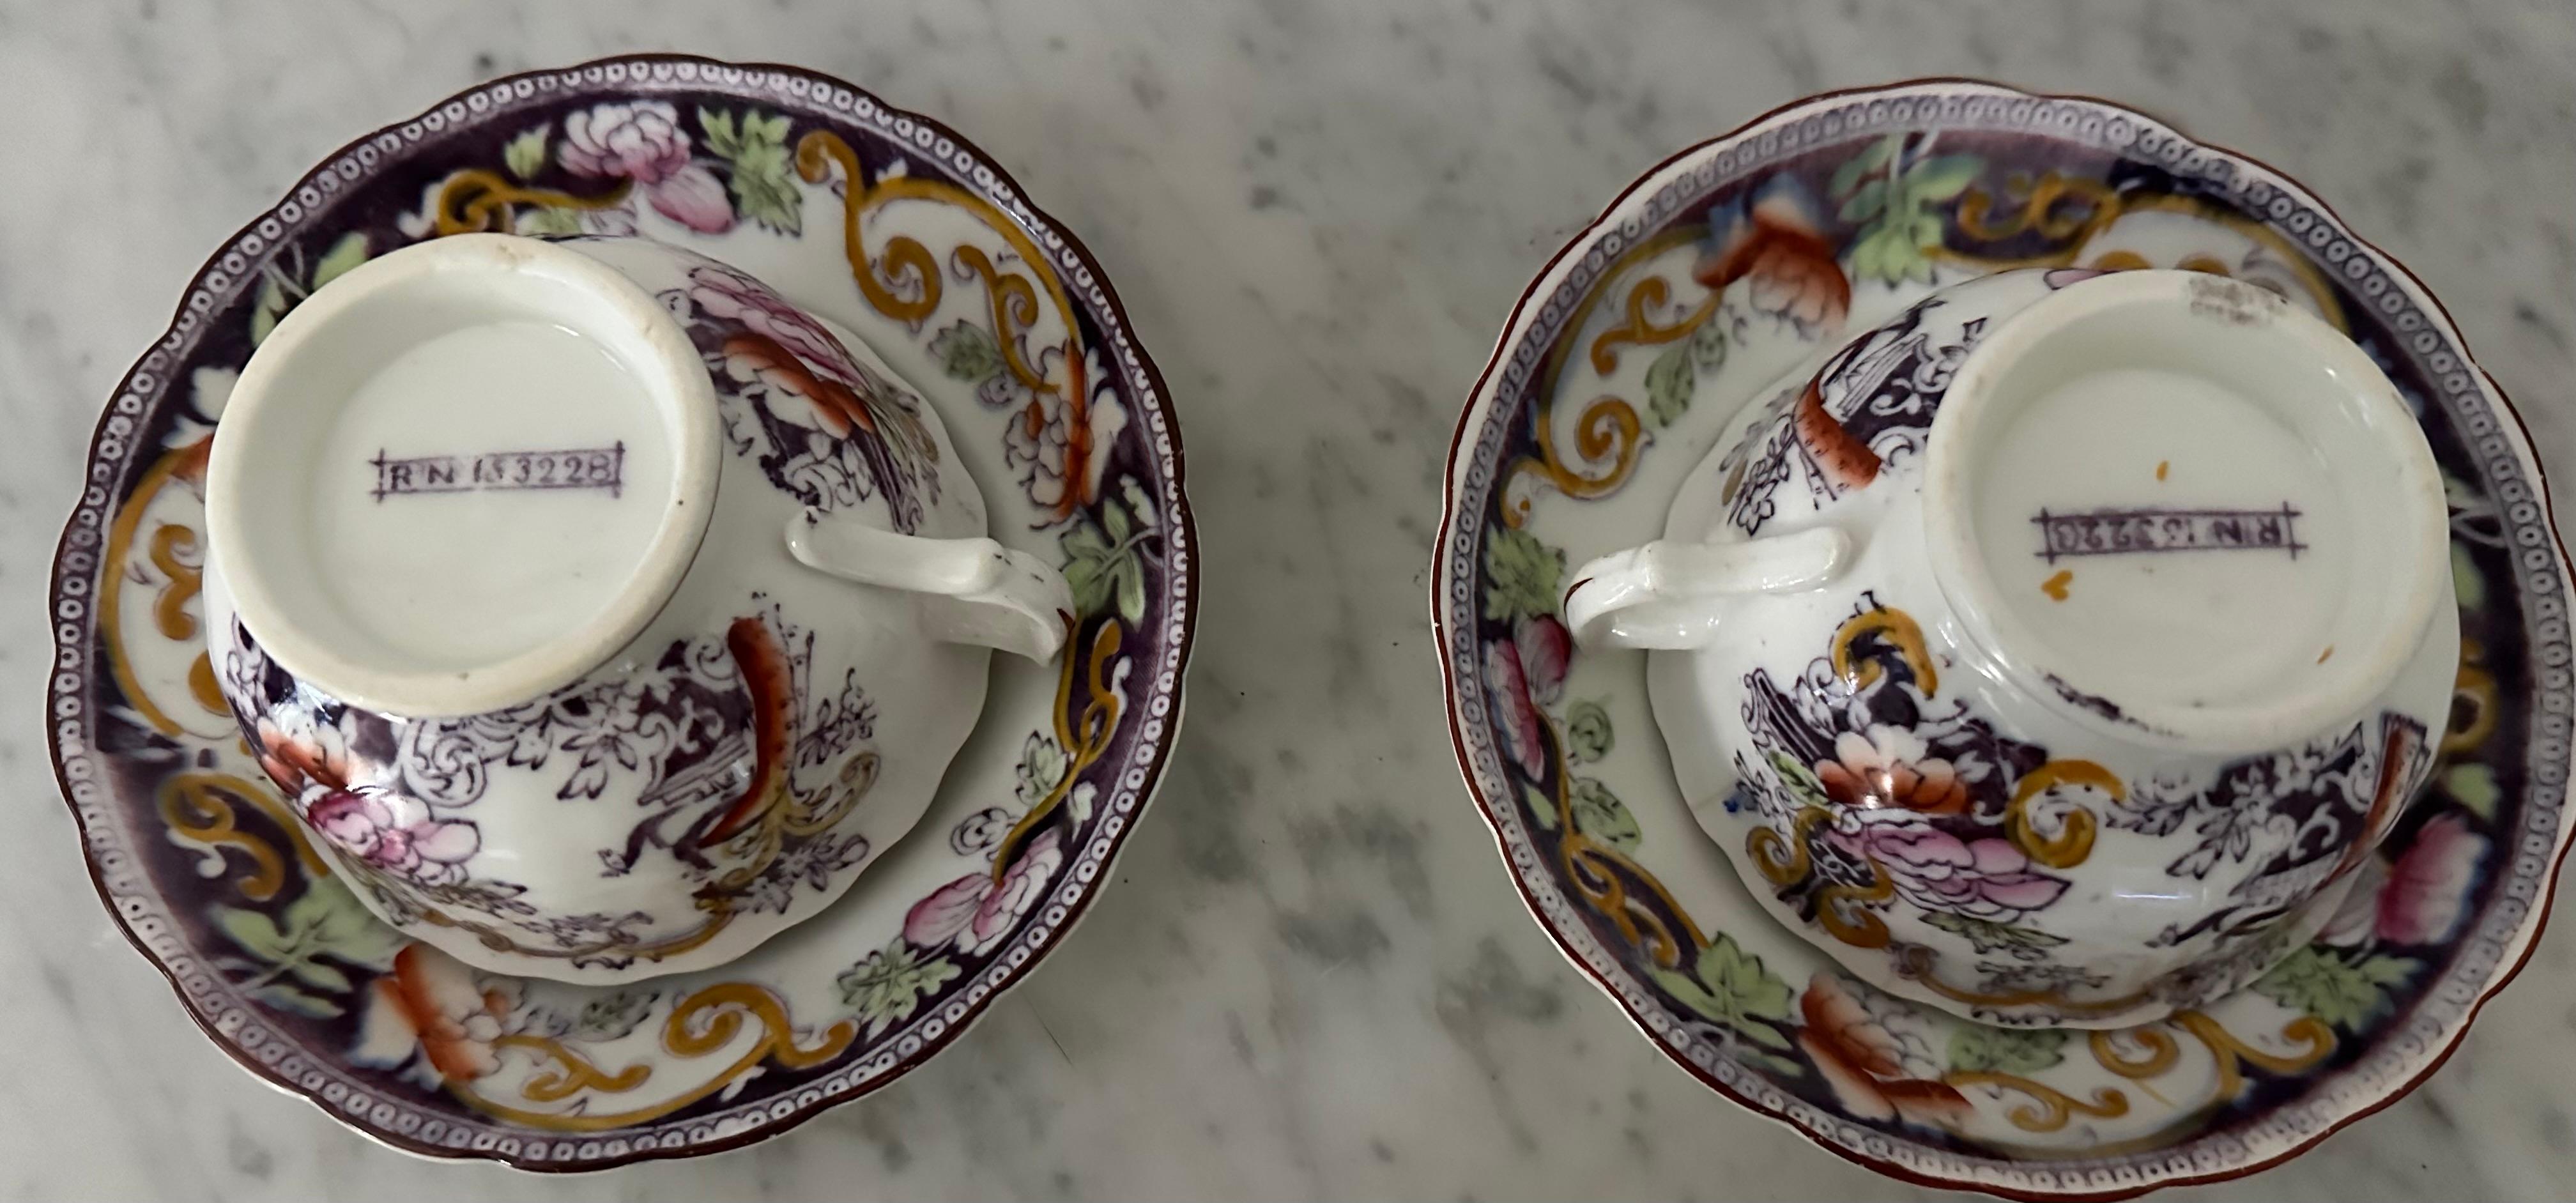 Pair of Antique 1890 English Bone China Tea Cup and Saucer Sets For Sale 5